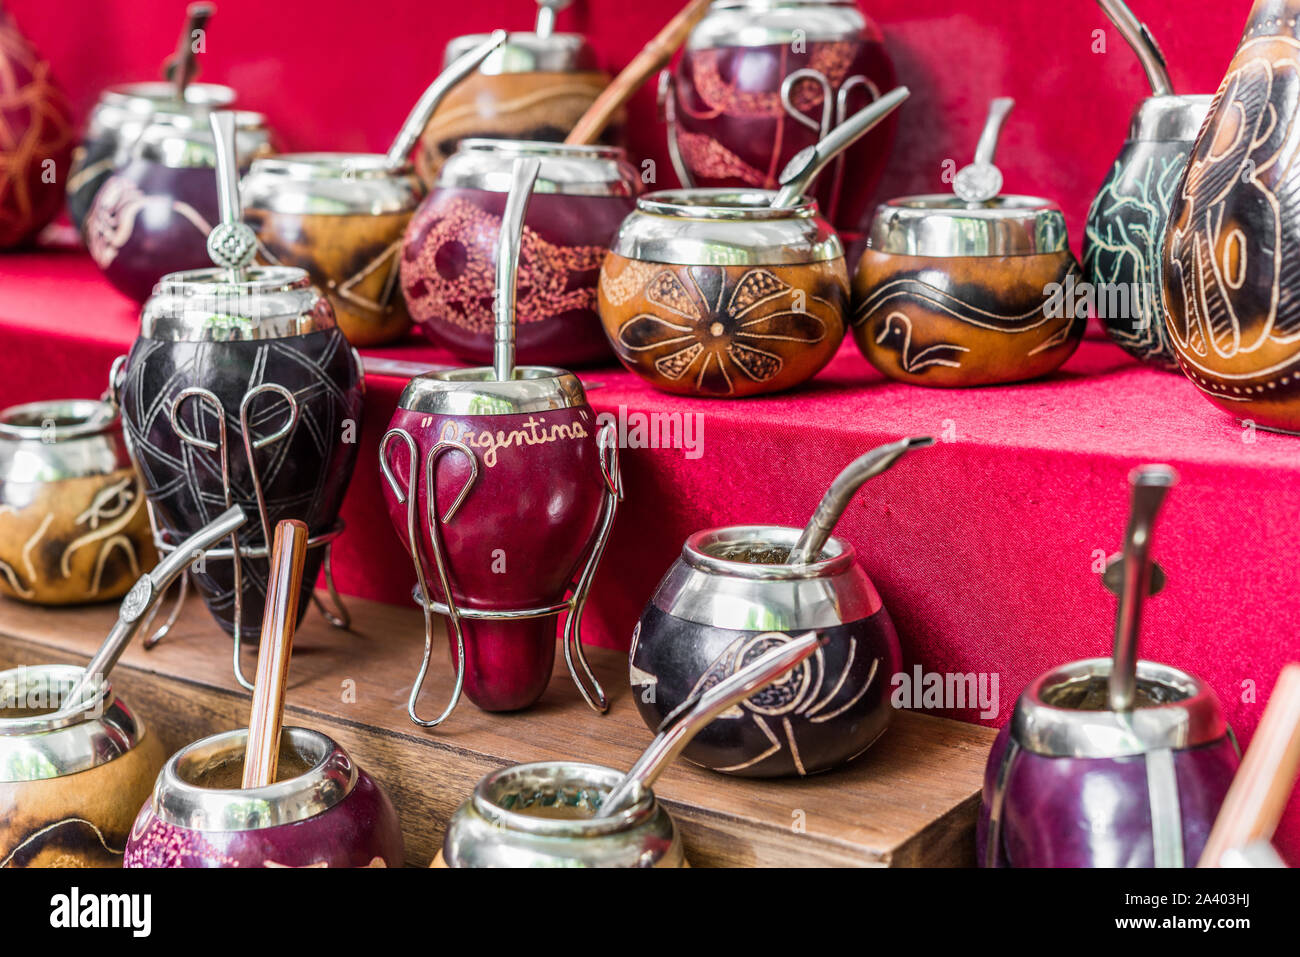 Traditional calabash gourds for Argentina yerba mate tea and bombilla straws. Stock Photo